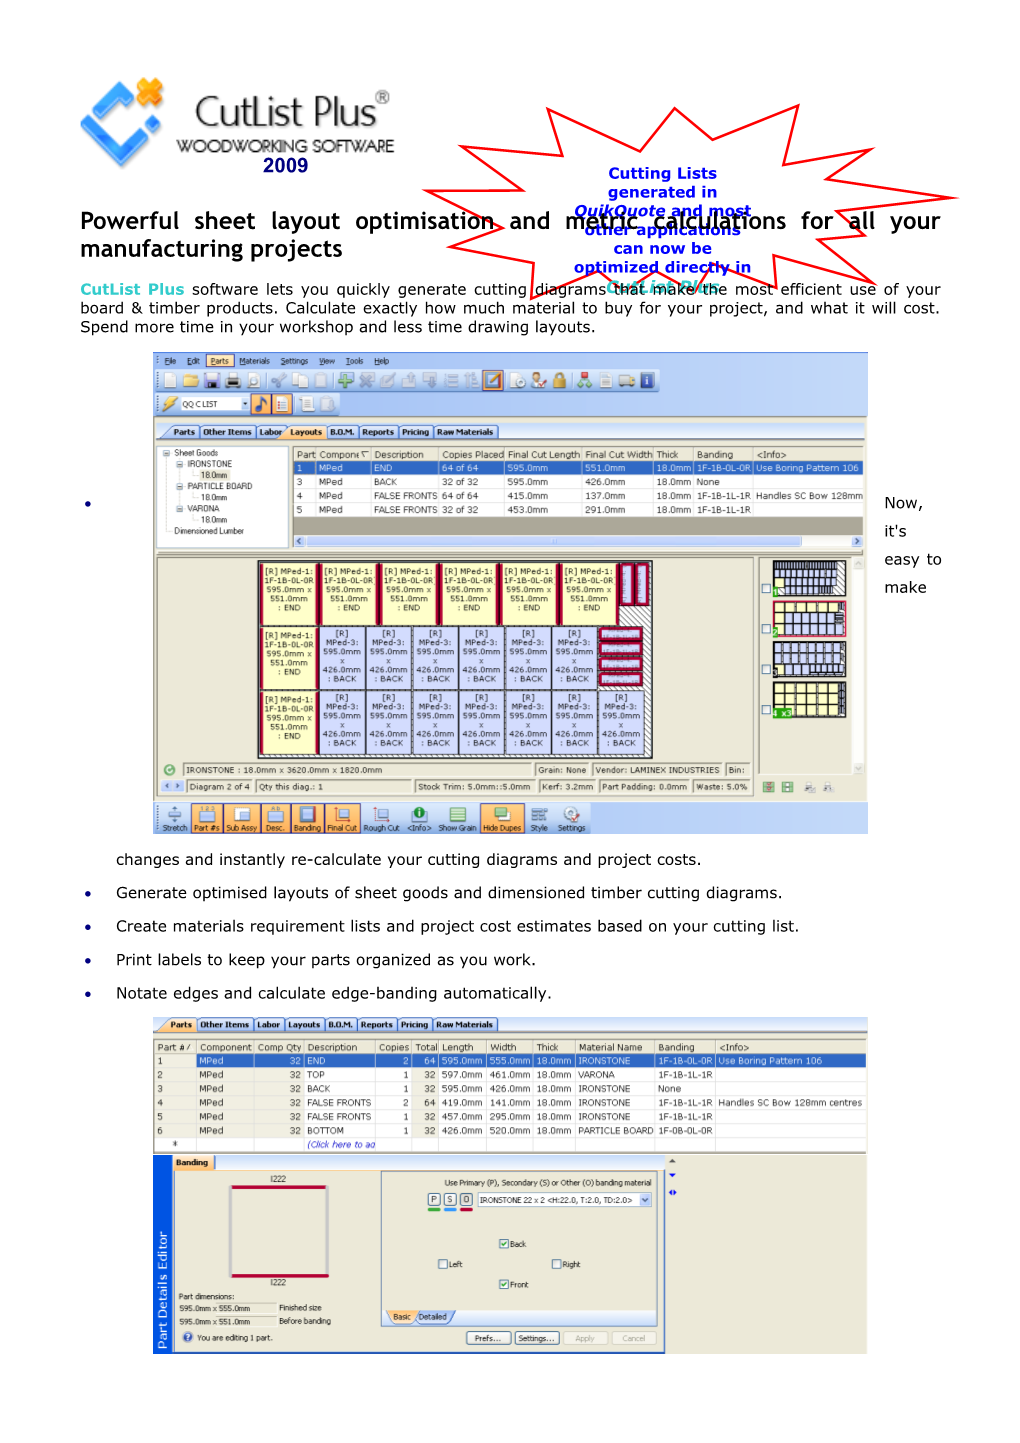 Powerful Sheet Layout Optimisation, Metric Calculations for Your Manufacturing Projects